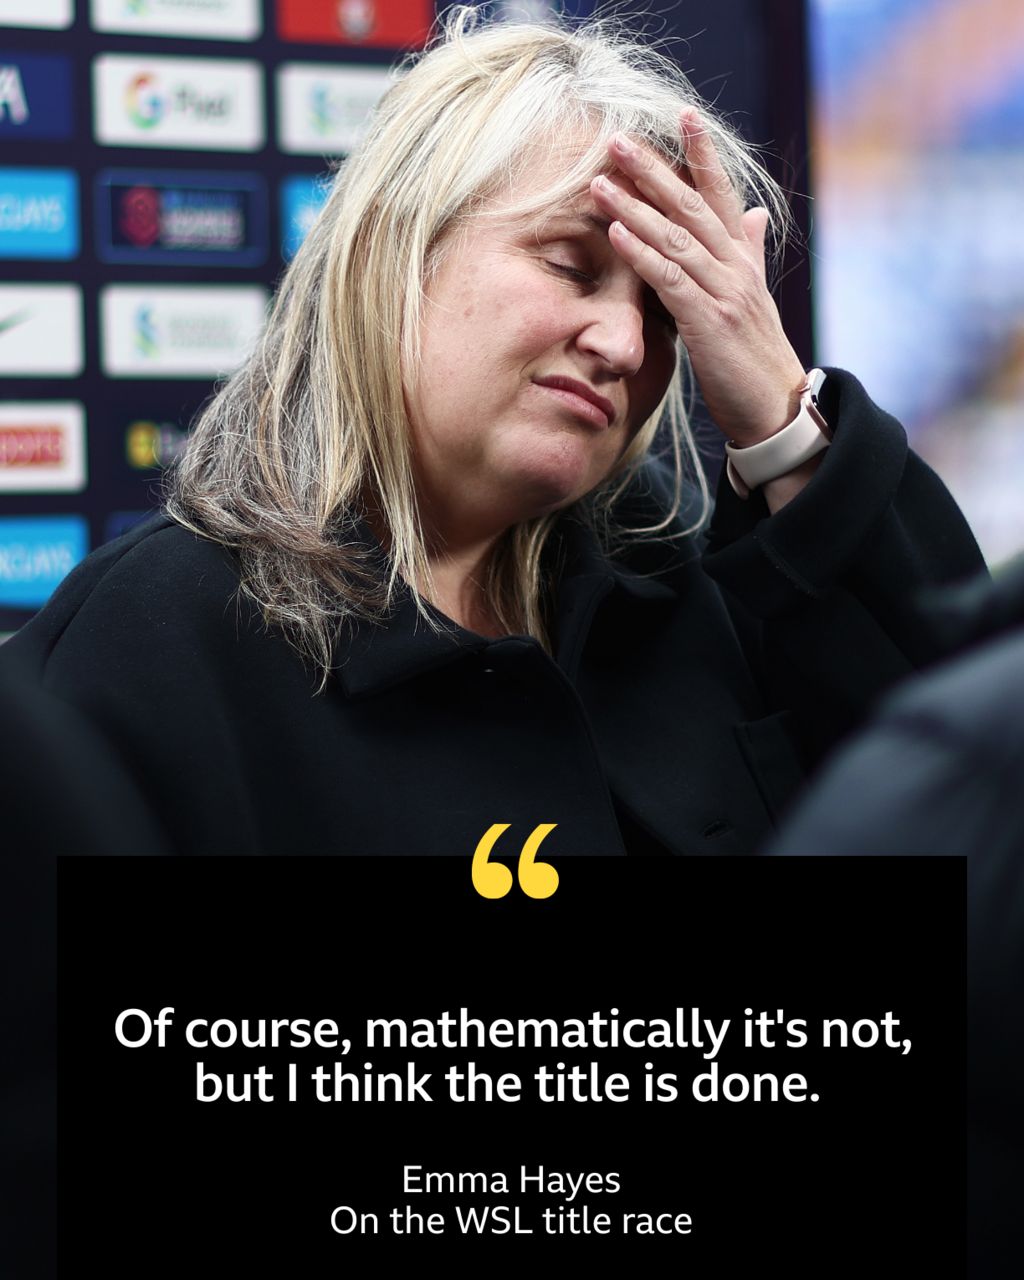 A quote from Emma Hayes saying: "Of course, mathematically it's not, but I think the title is done."